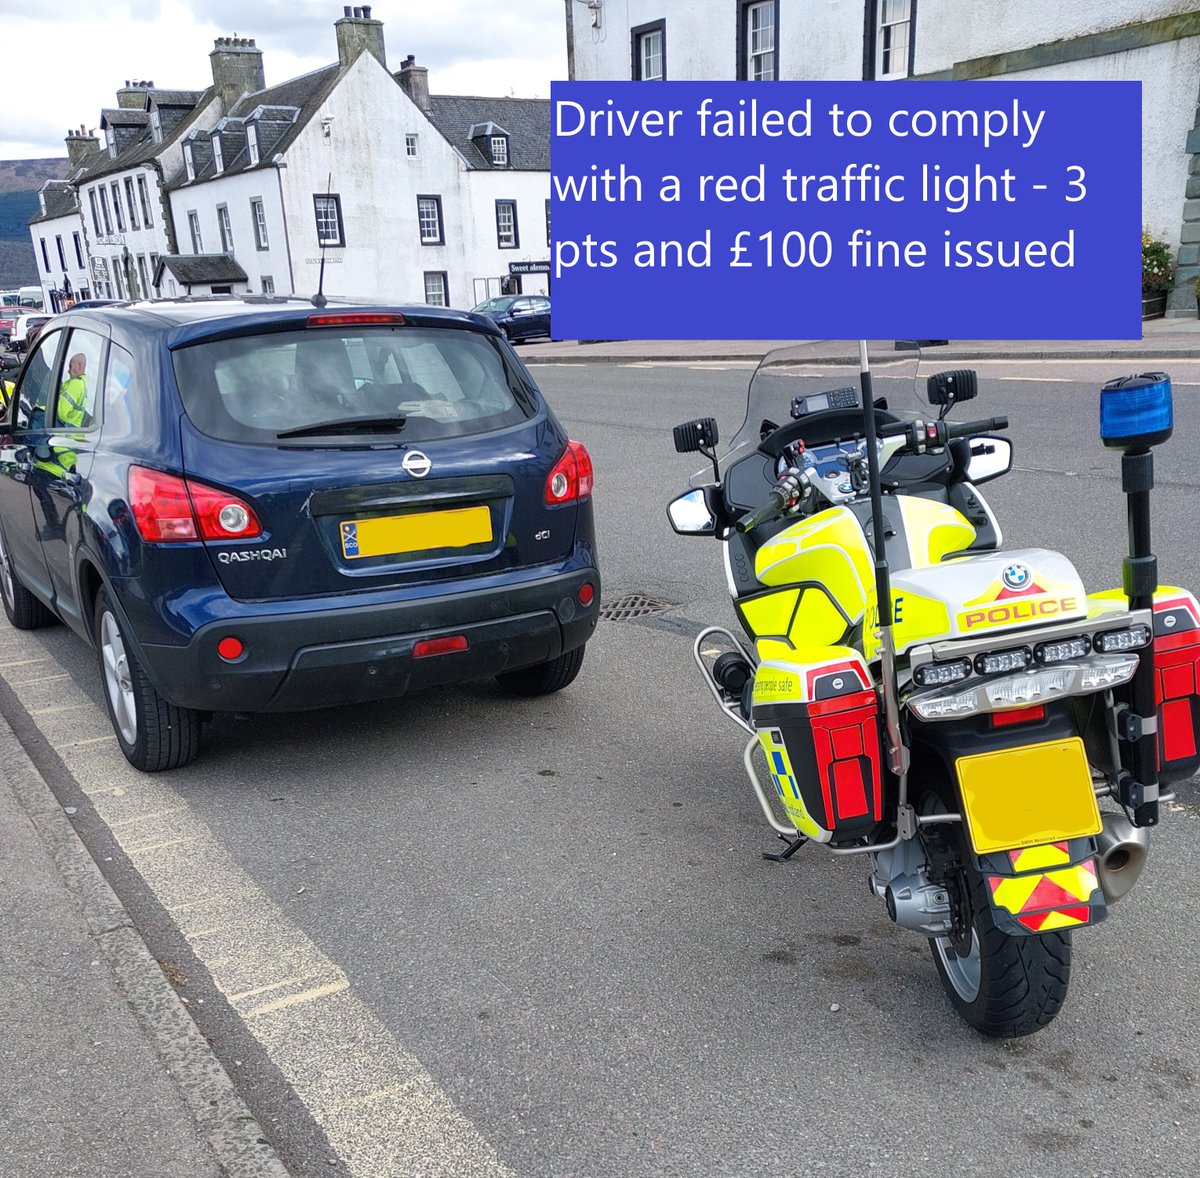 Over the past 24hrs officers from the #NationalMotorcycleUnit have stopped numerous road users across Scotland. Offences identified include driving with no insurance, no seatbelts, no MOT & using mobile phones whilst driving amongst others. Please #DontRiskIt #KeepingPeopleSafe